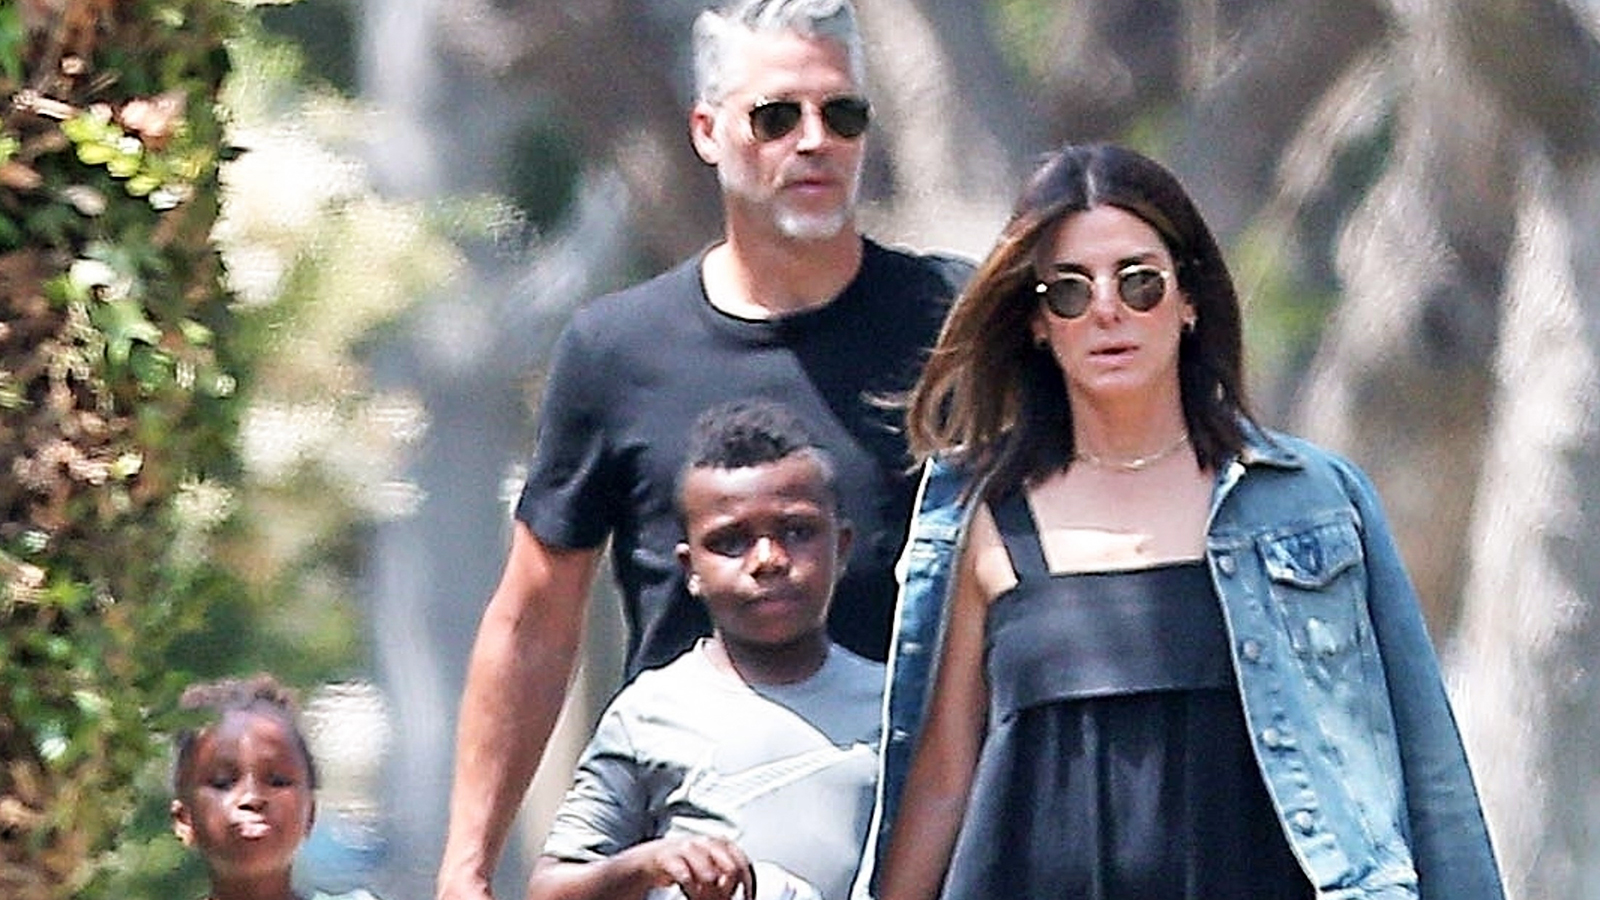 Sandra Bullock and Bryan Randall Walk With Kids to Party: Photos